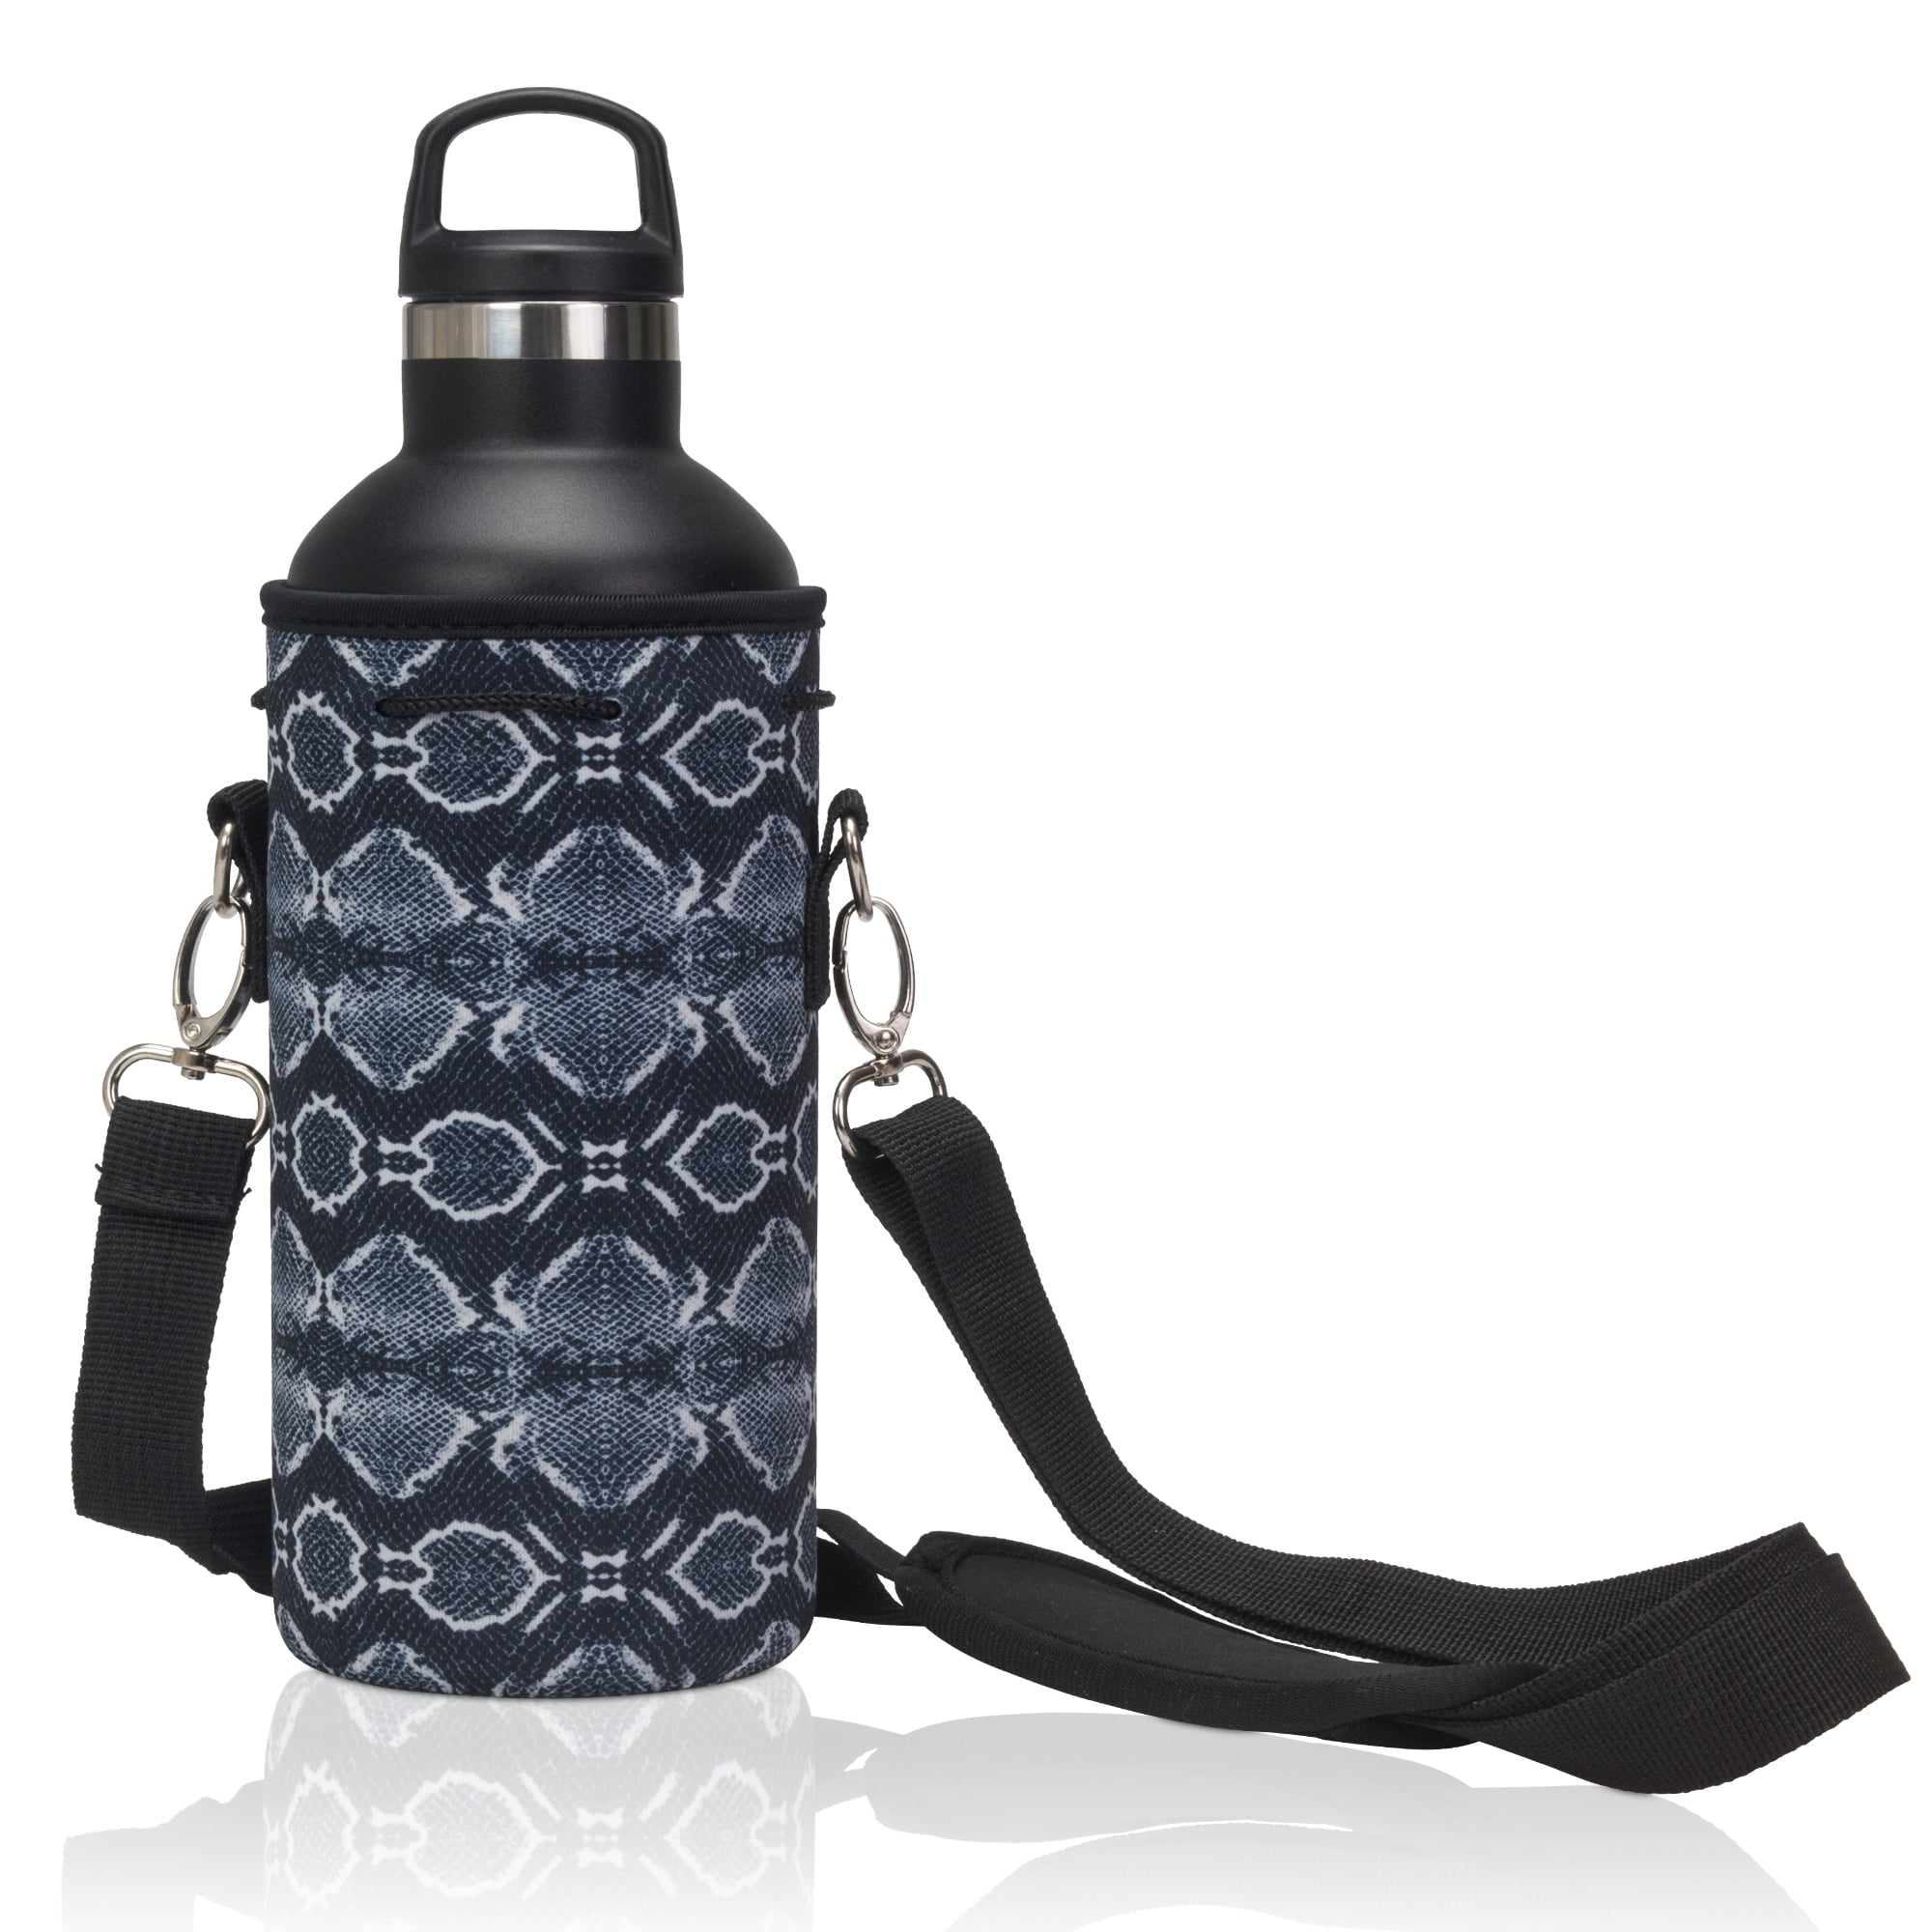 MagiDeal Water Bottle Carrier Insulated Pouch Holder Shoulder Strap 1L